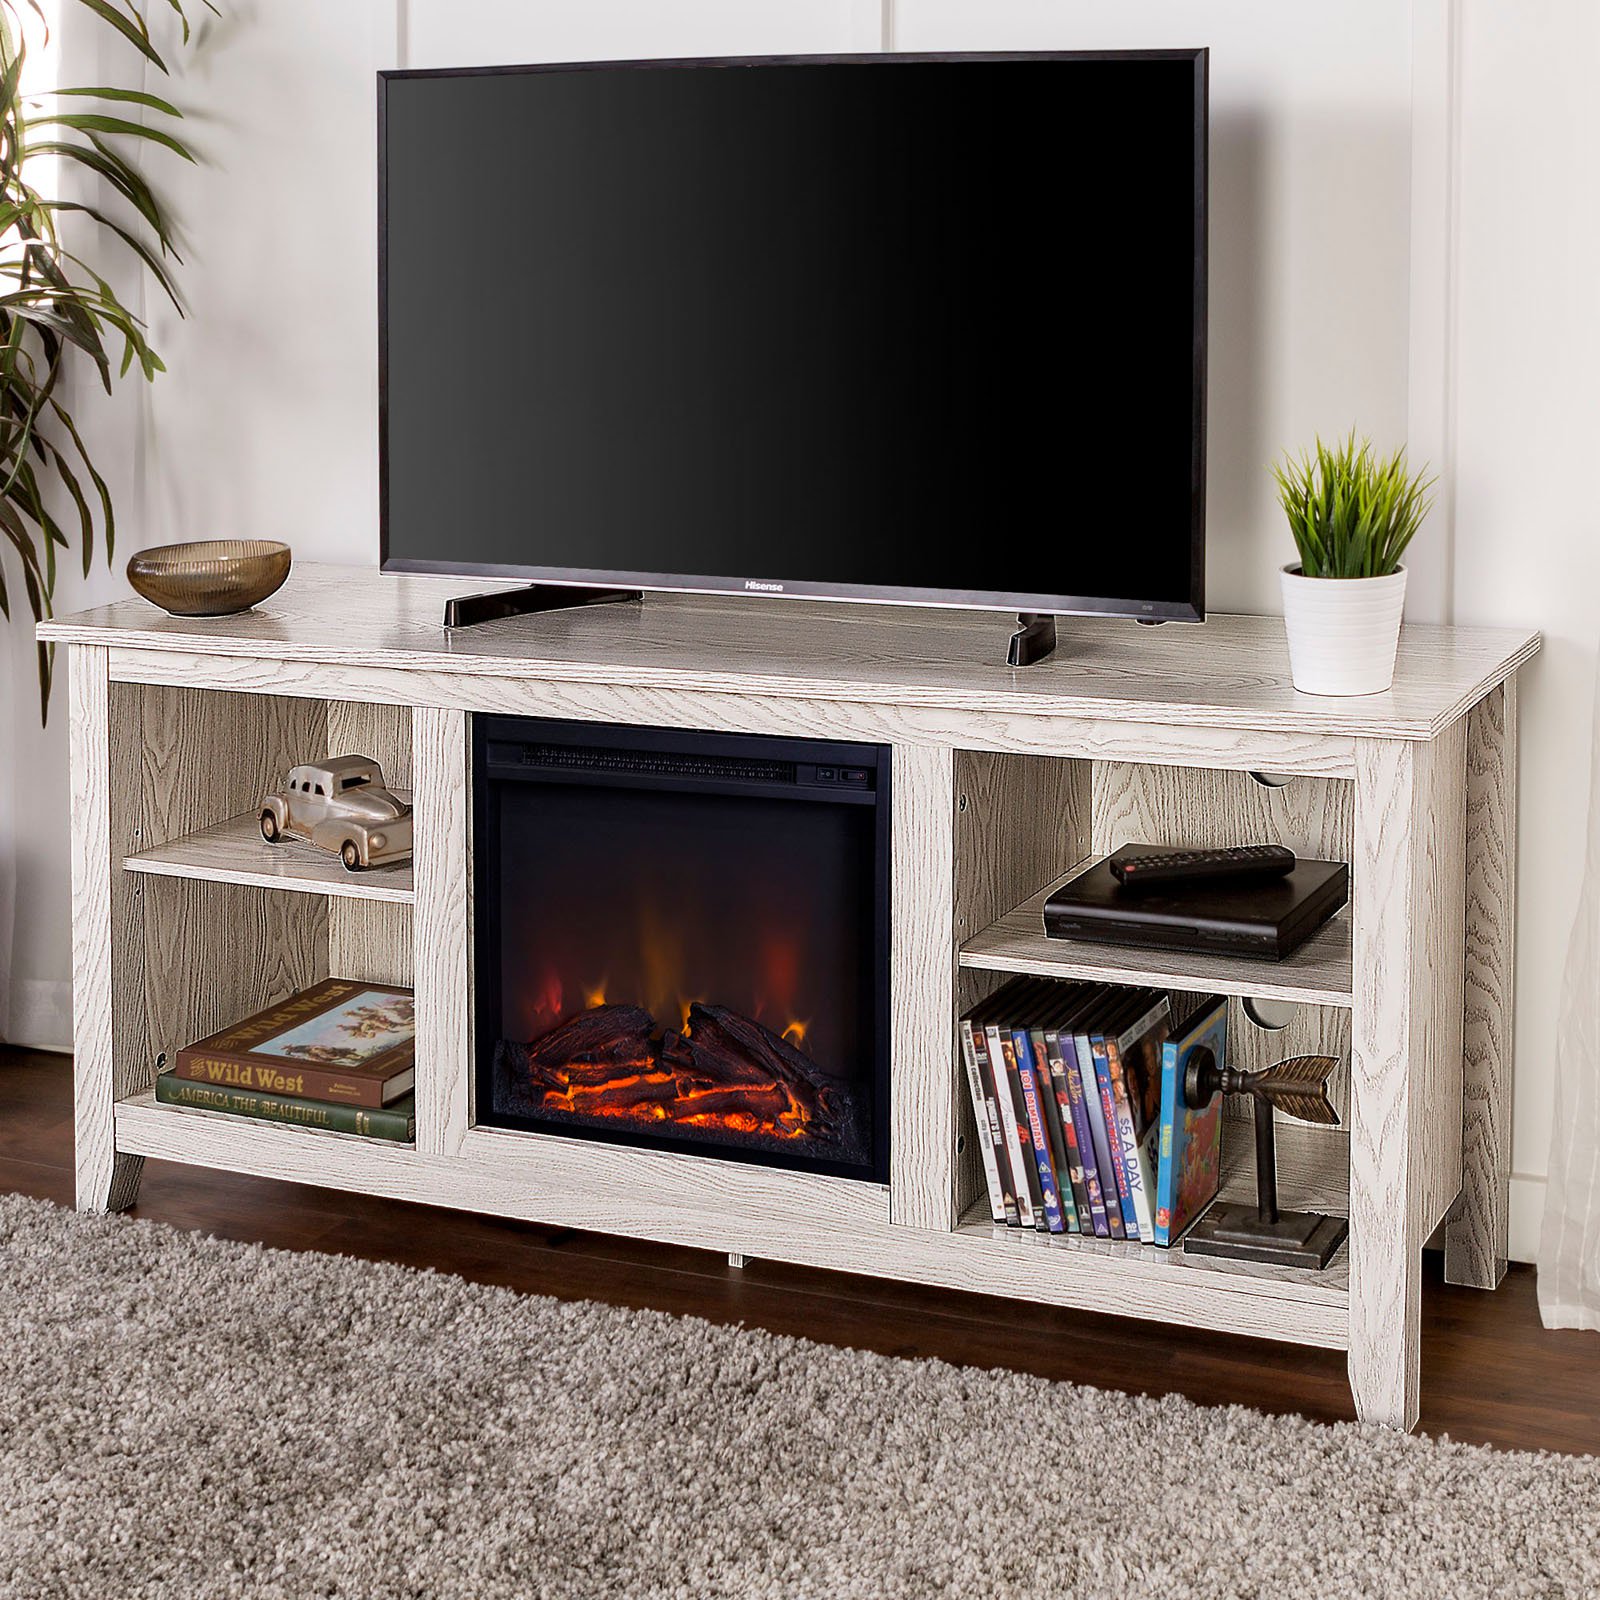 Sliding Barn Door Tv Stand with Fireplace Luxury Walker Edison Fireplace Tv Stand White Wash In 2019